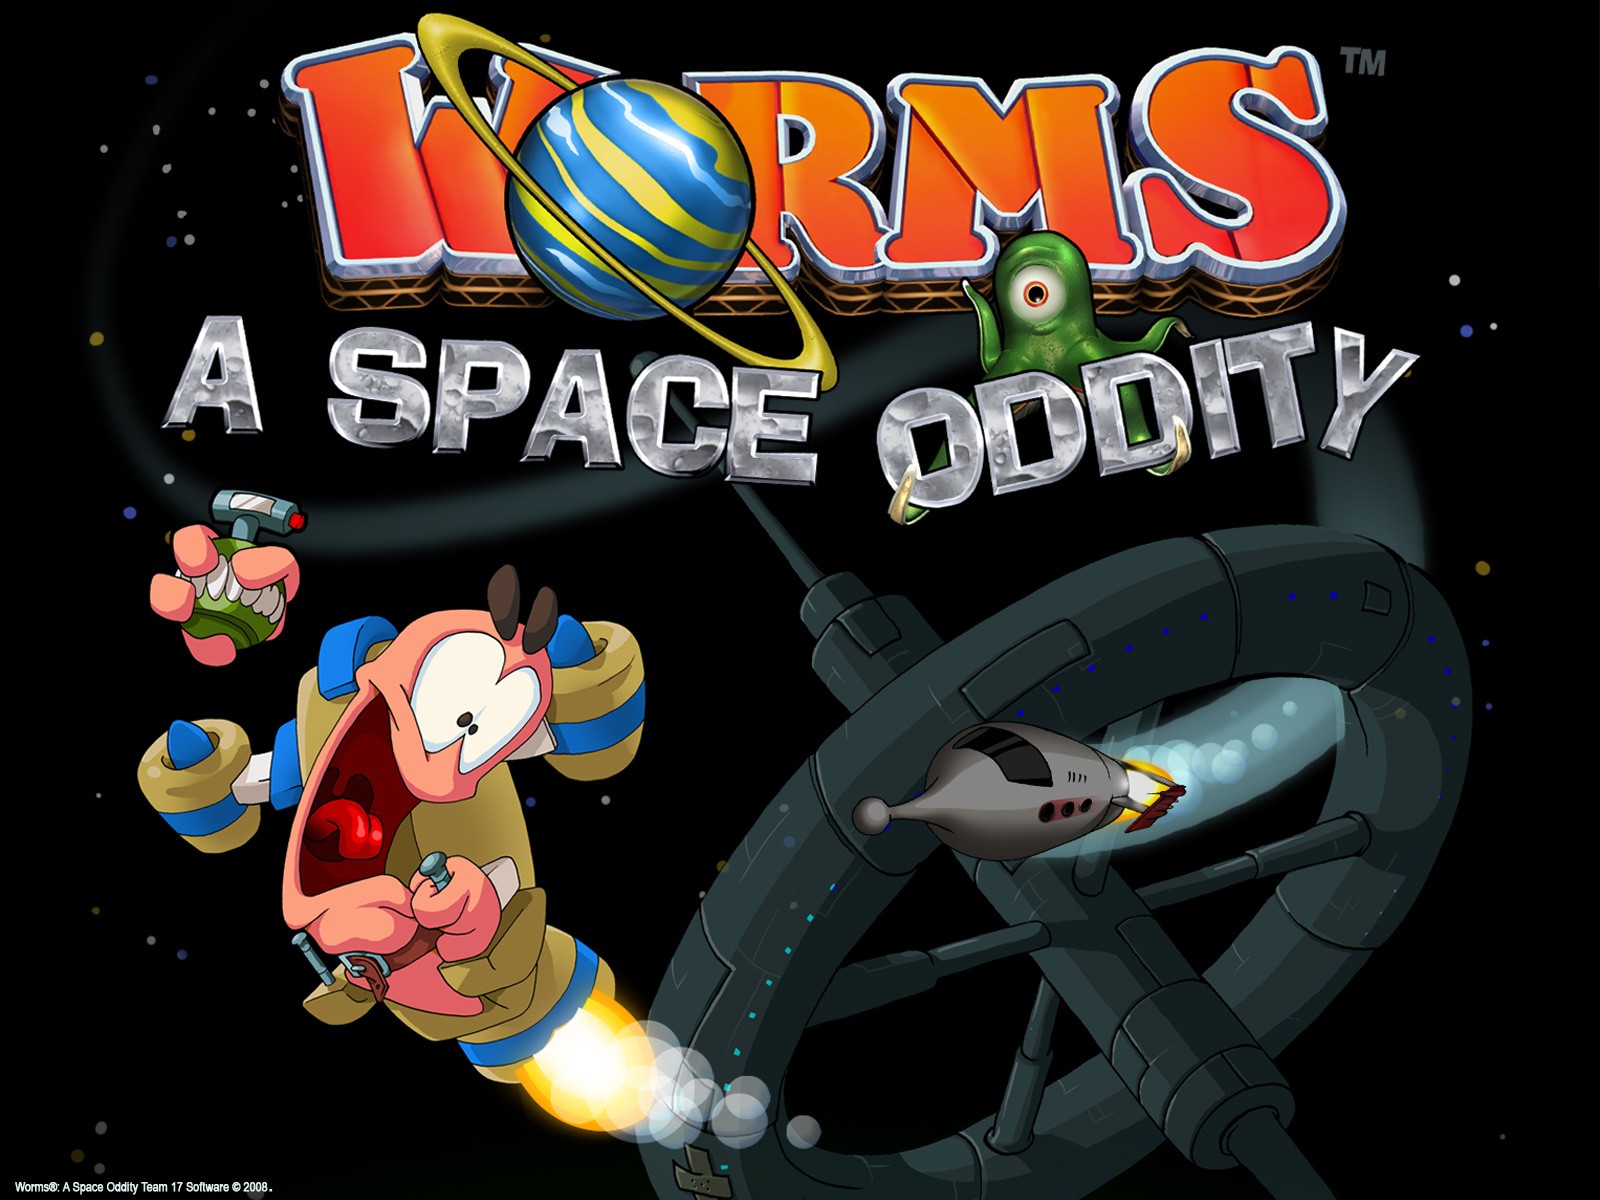 Worms Worms A Space Oddity Video Games 2008 Year 1600x1200